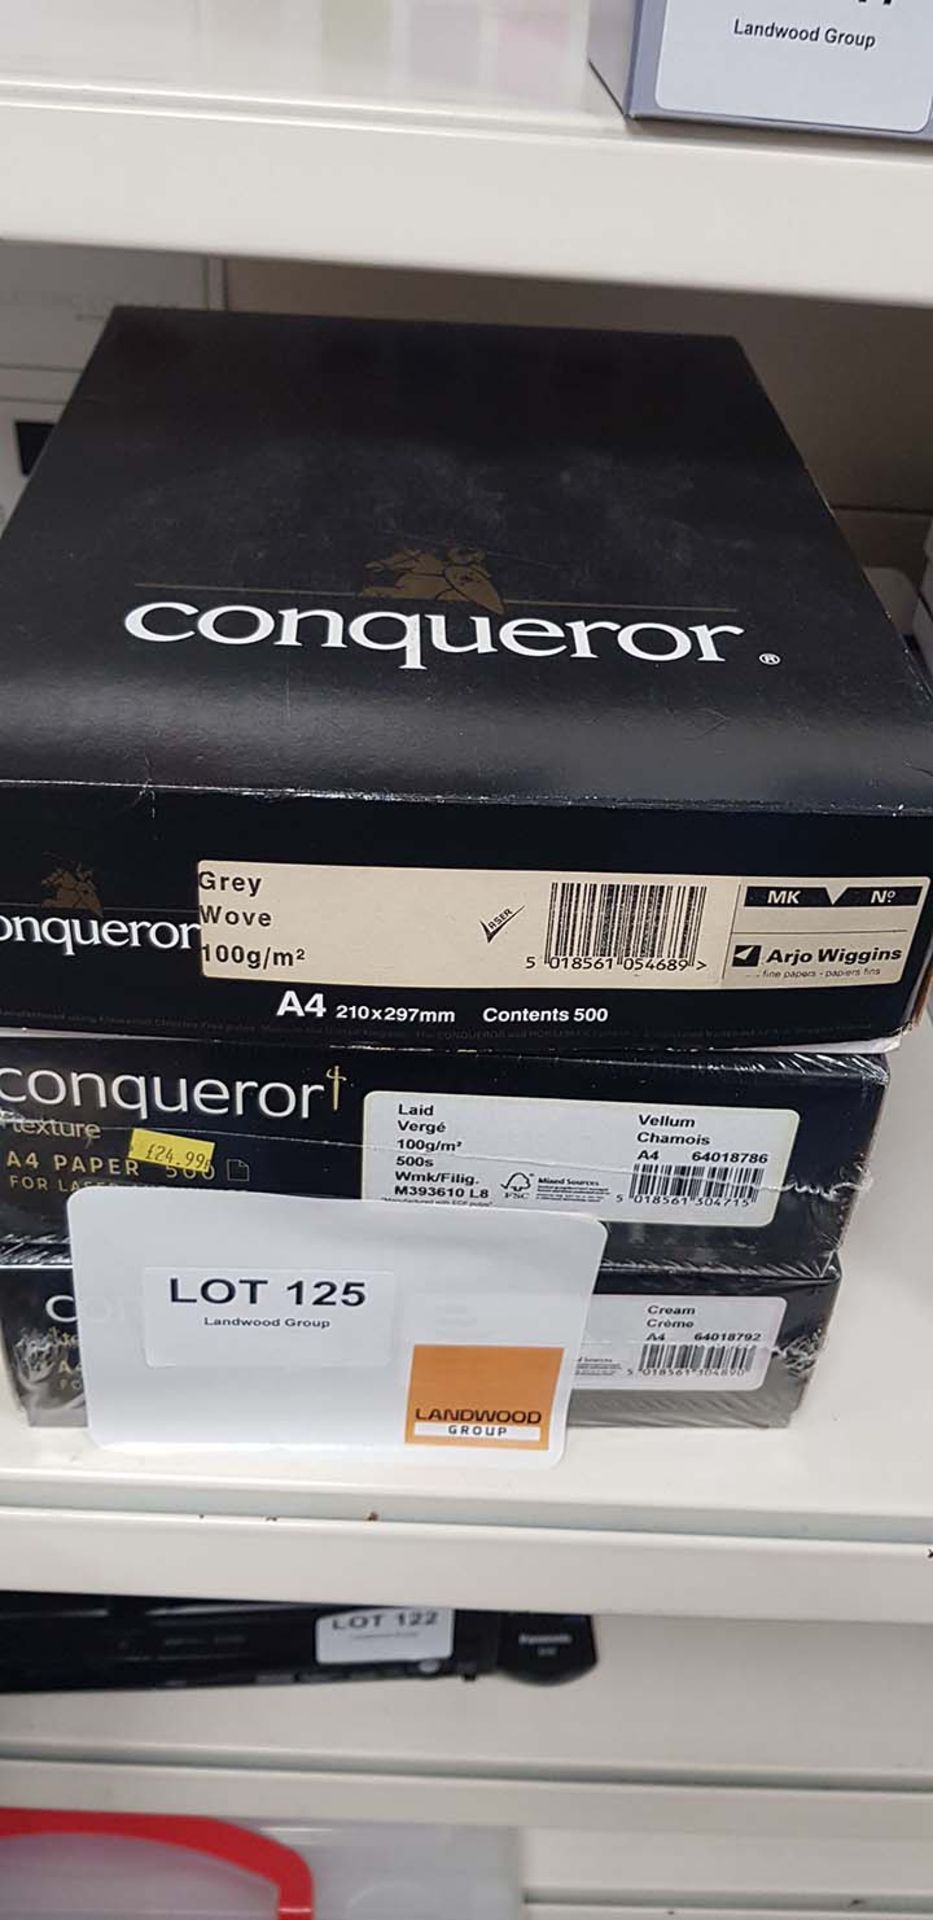 3 Boxes of Conqueror Writing Paper